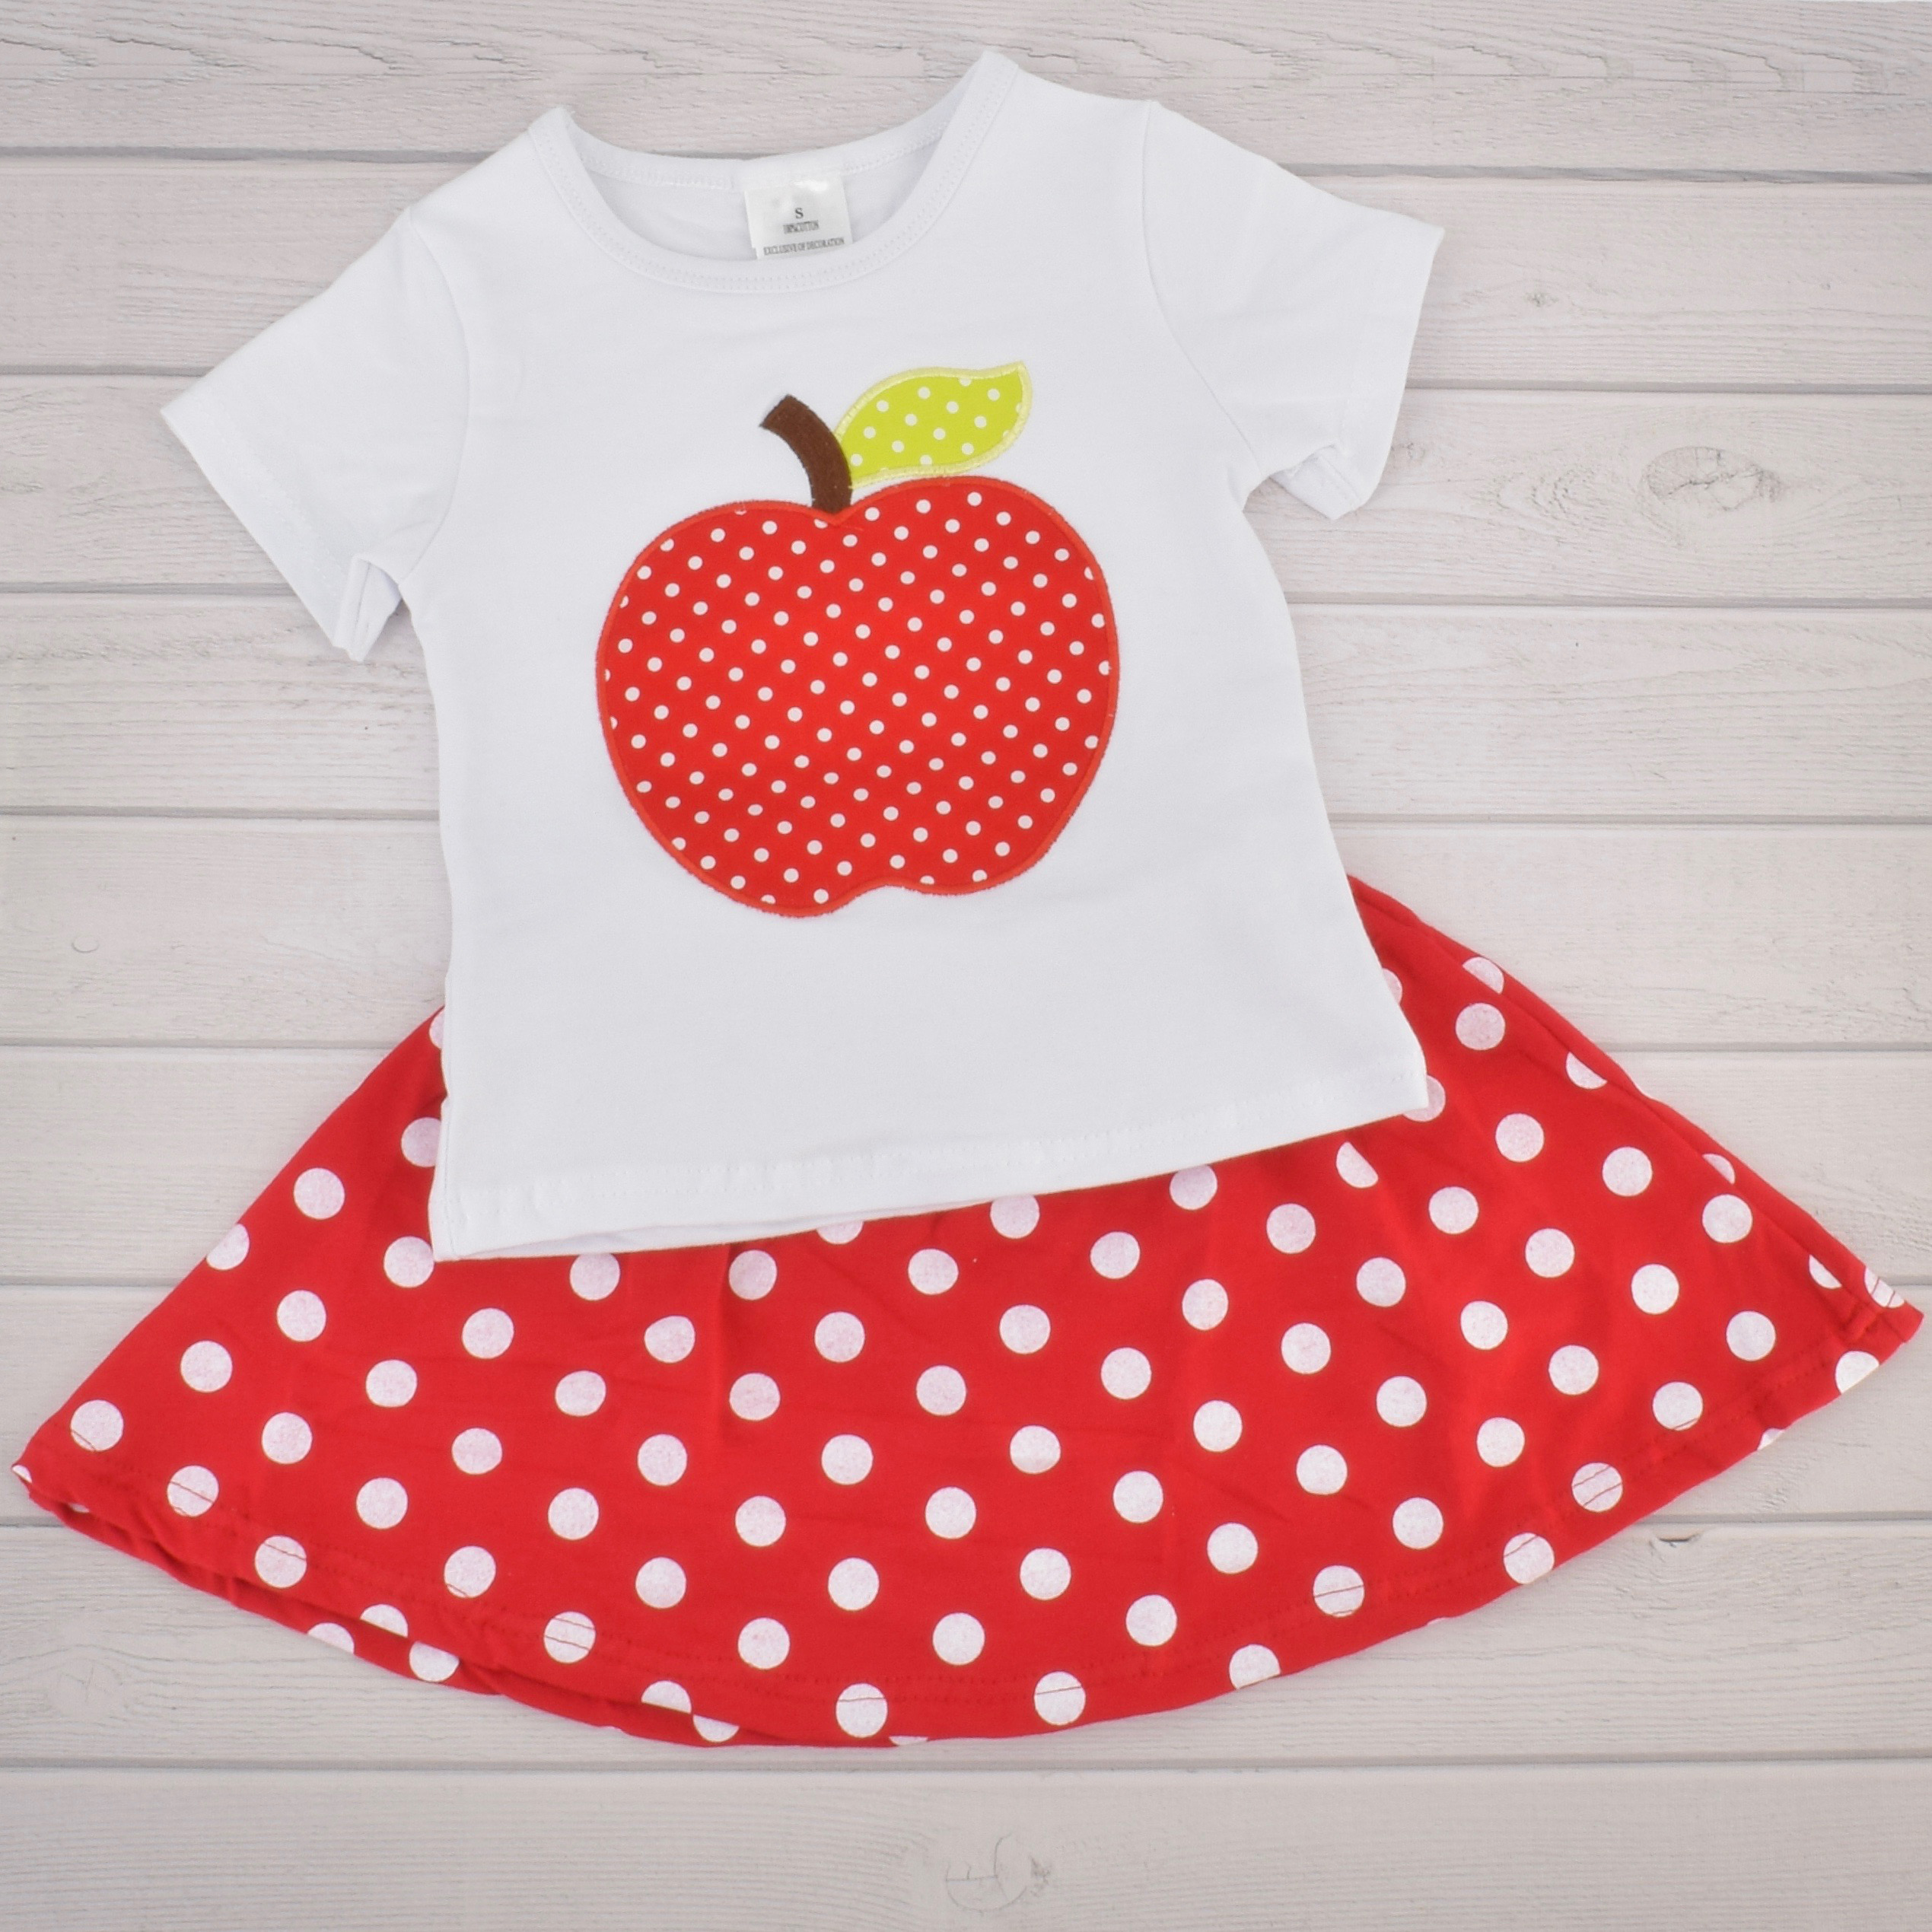 Unique Baby Girls Back to School Apple Skirt Boutique Outfit (5T/L, Red) - image 4 of 4